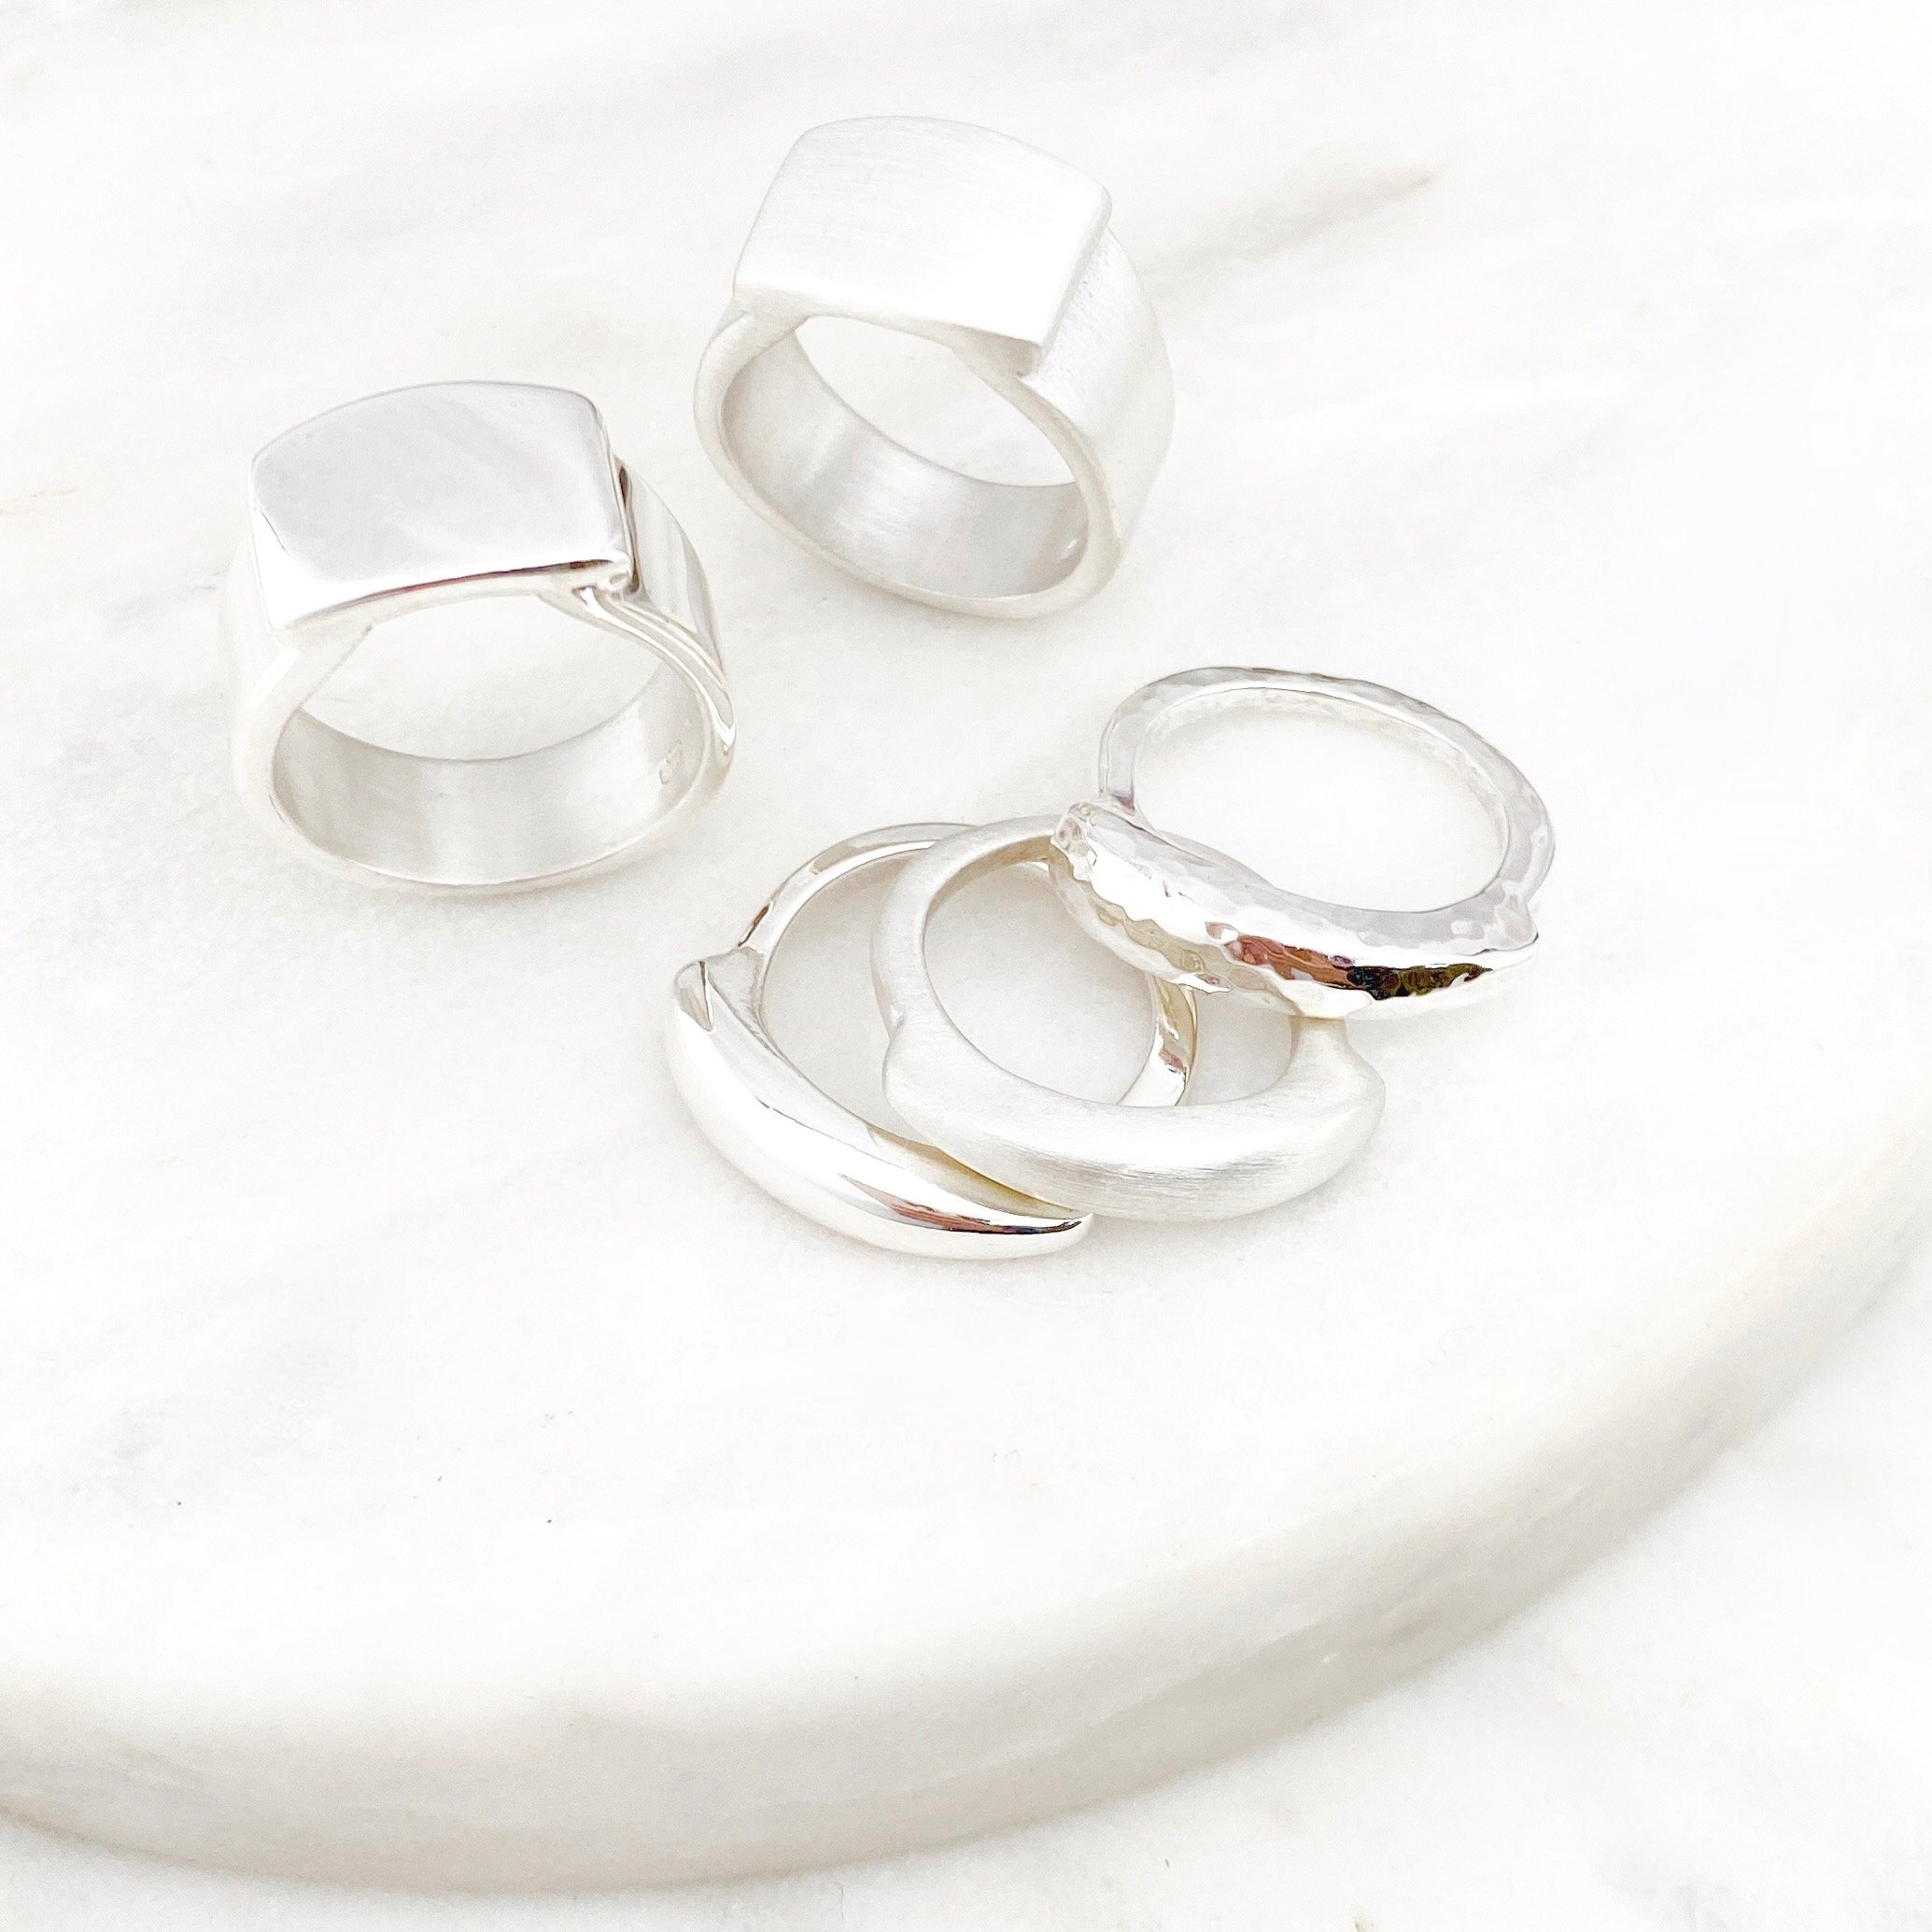 "Modern Signet" and "Pebble" rings in solid Sterling Silver